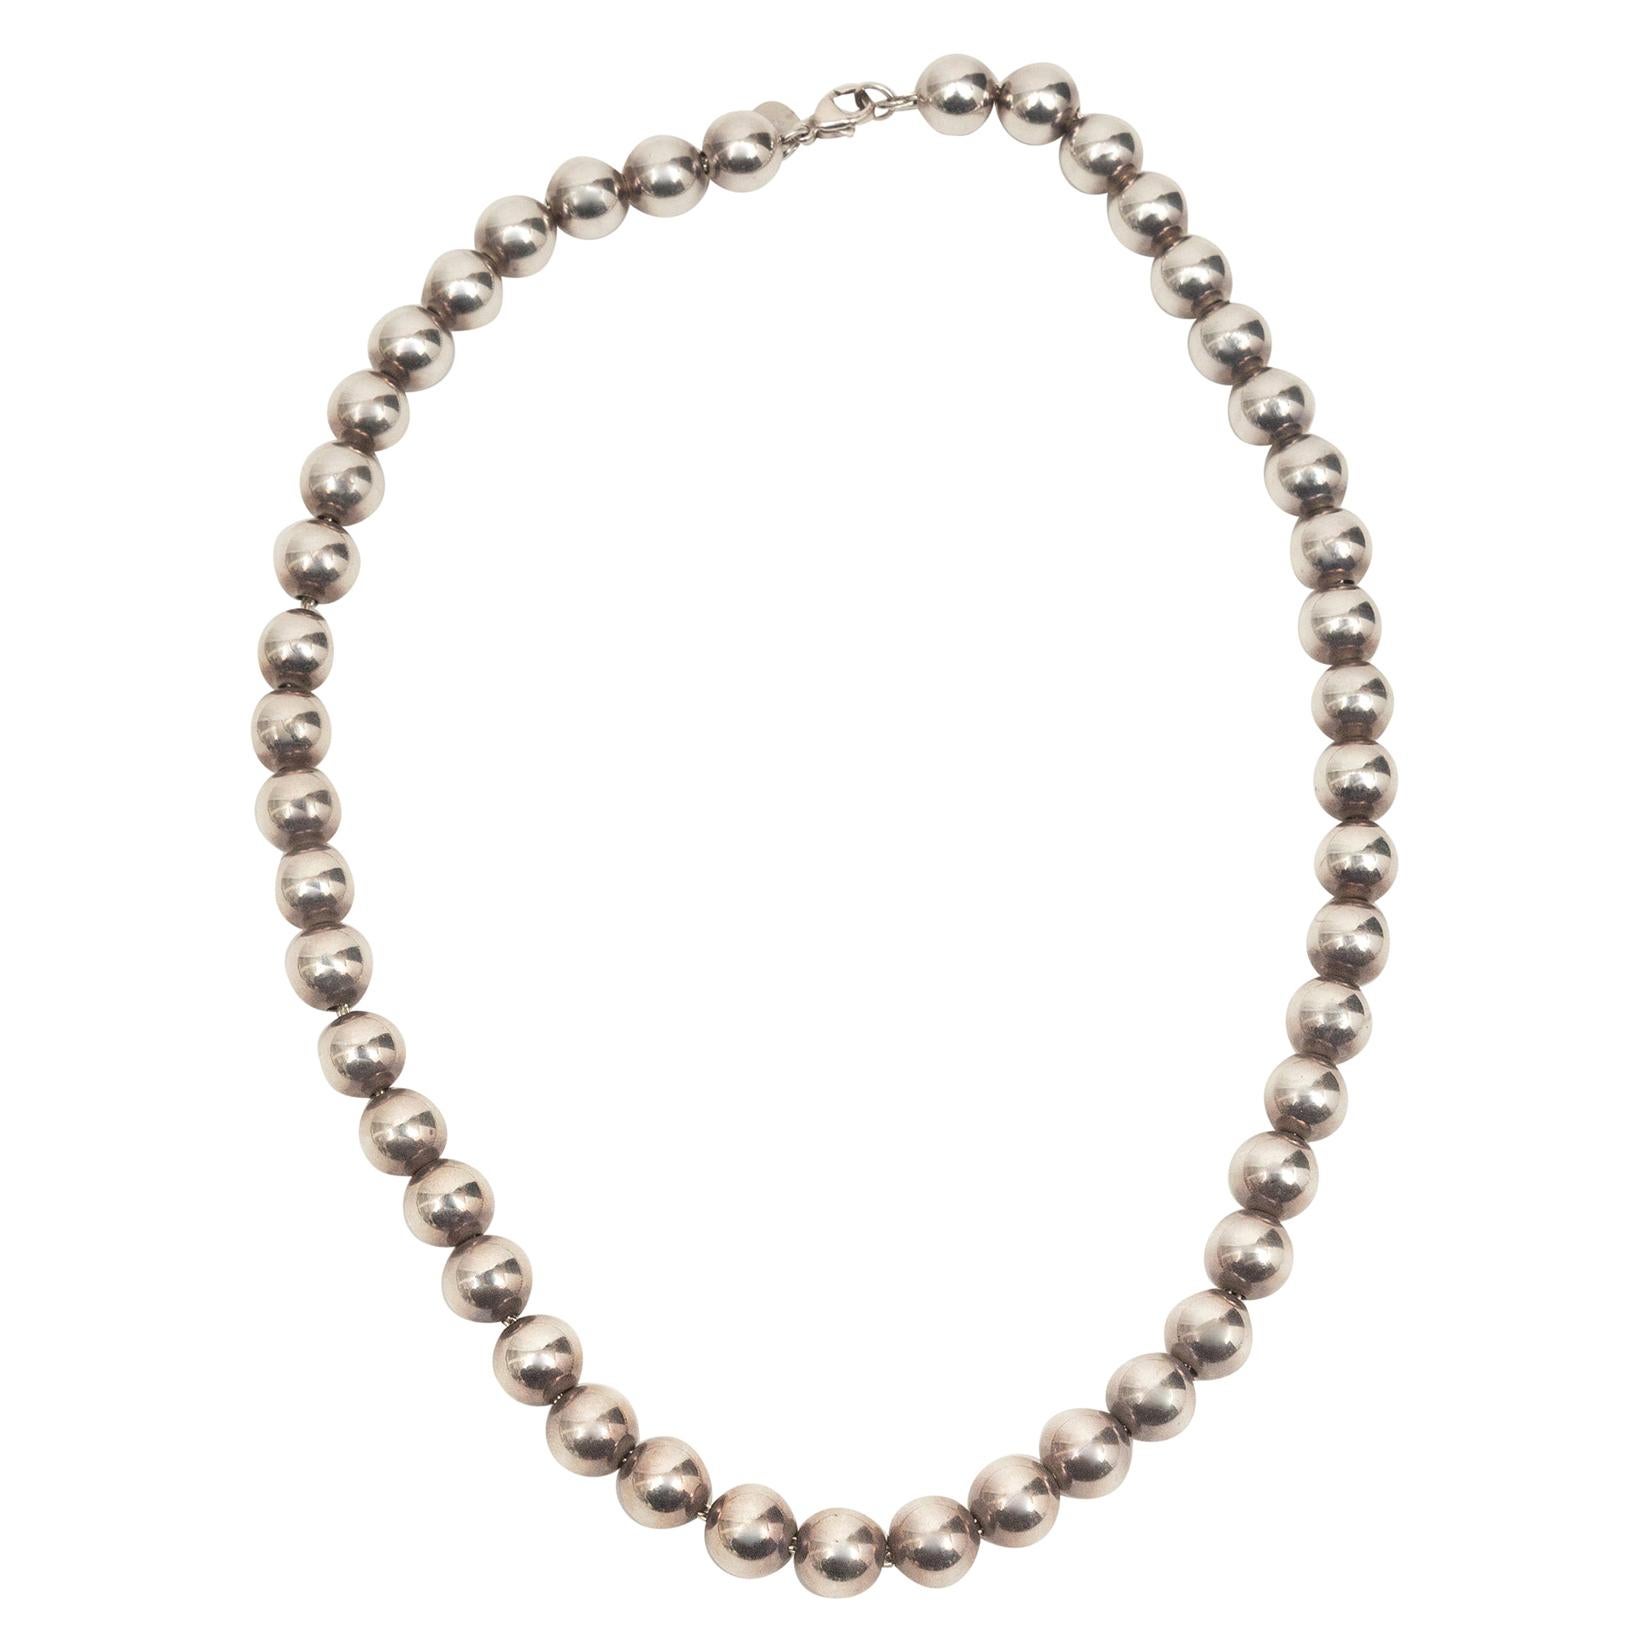  Tiffany & Co. Sterling Silver Short Ball Necklace